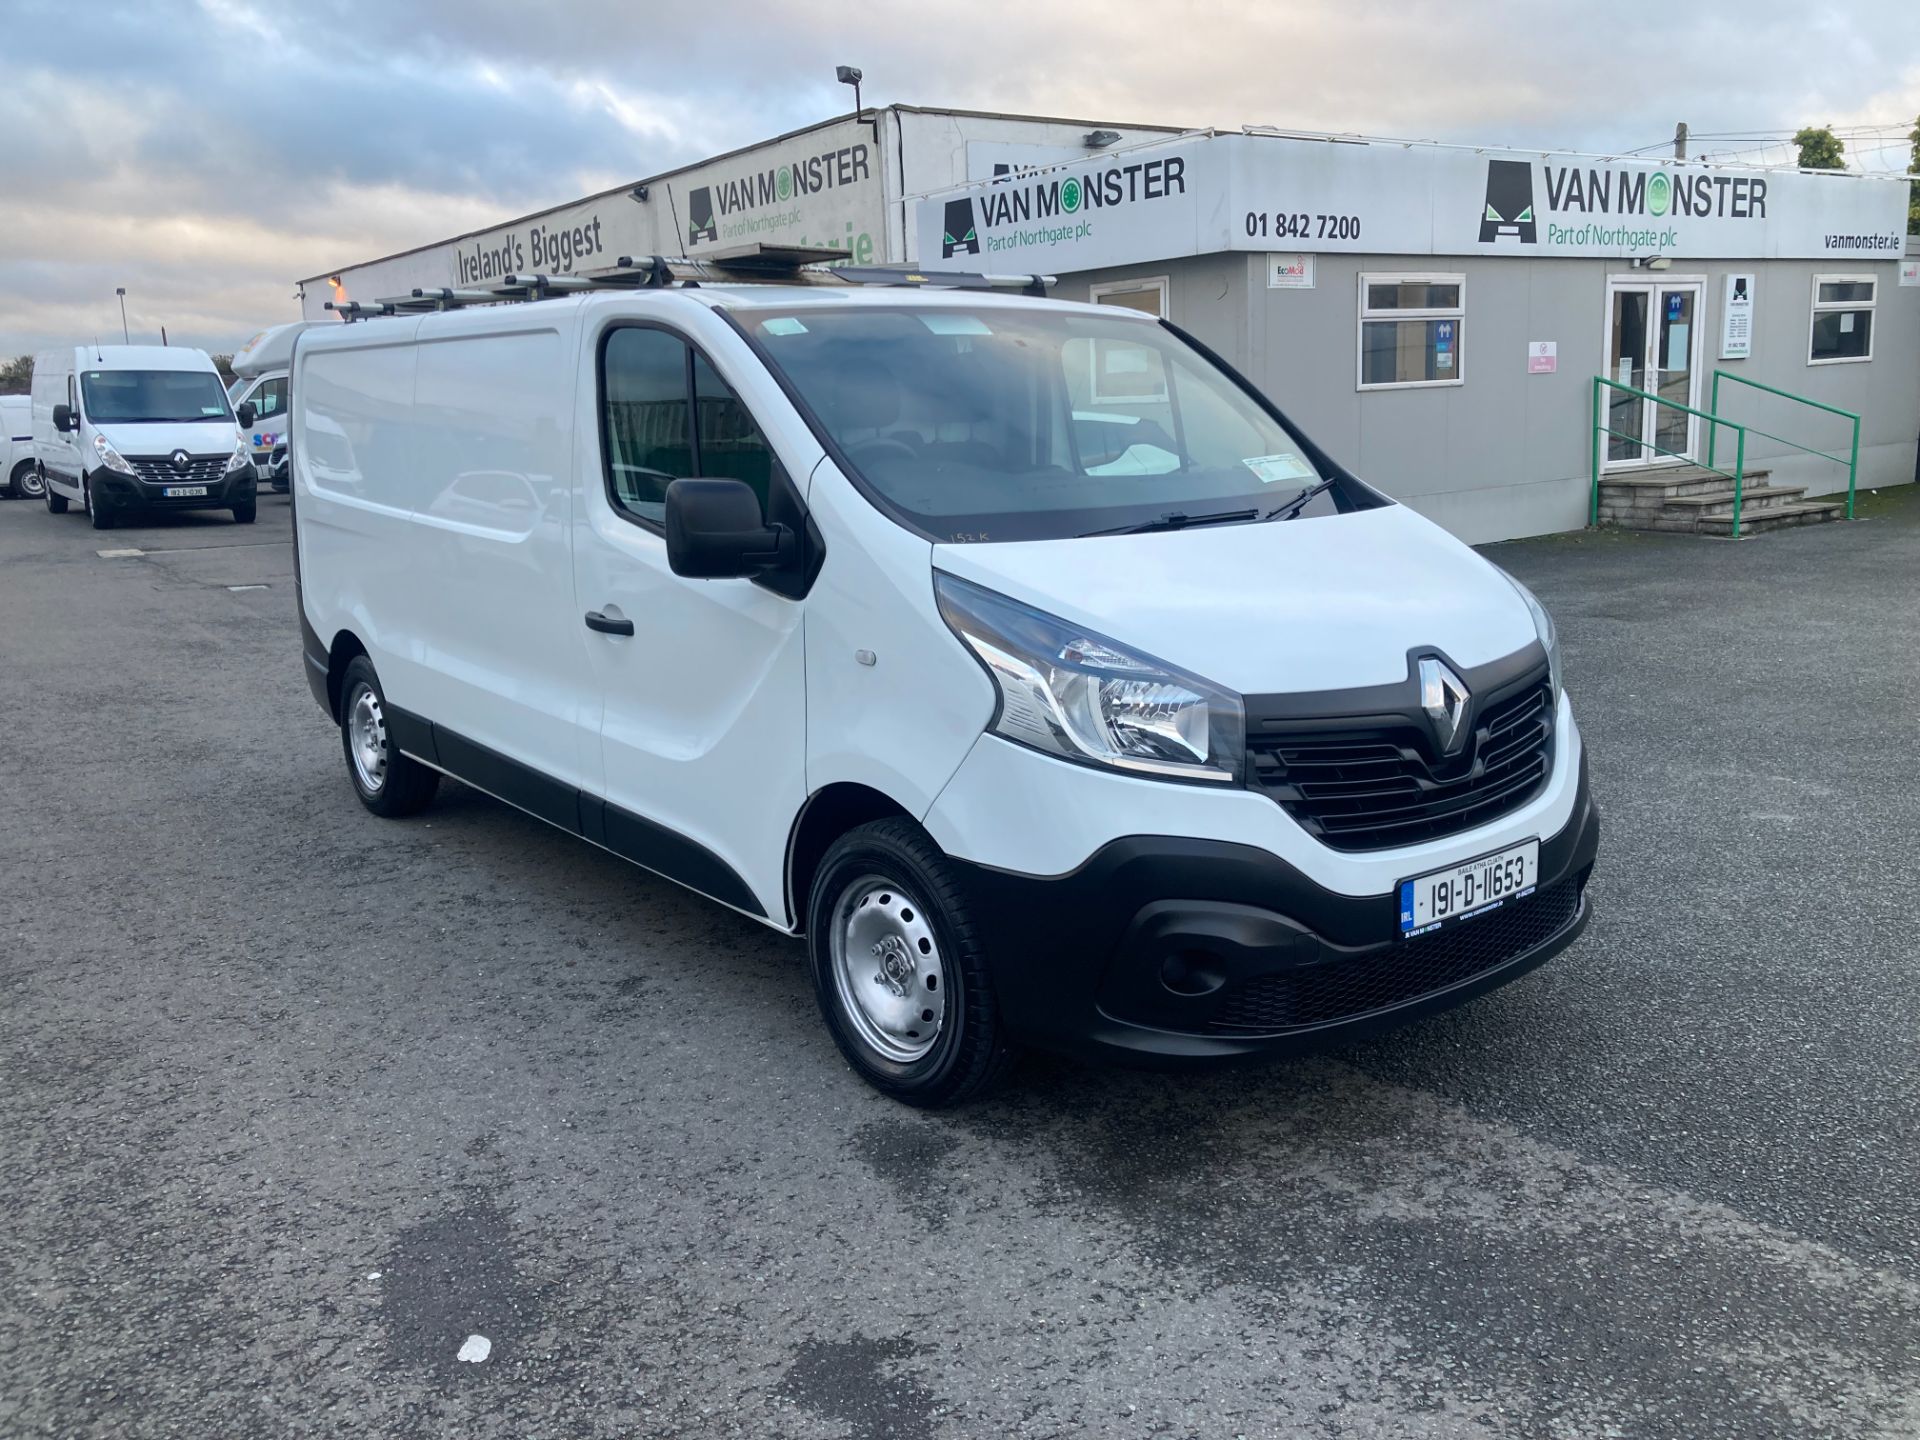 2019 Renault Trafic LL29 DCI 120 Business (191D11653) Image 1